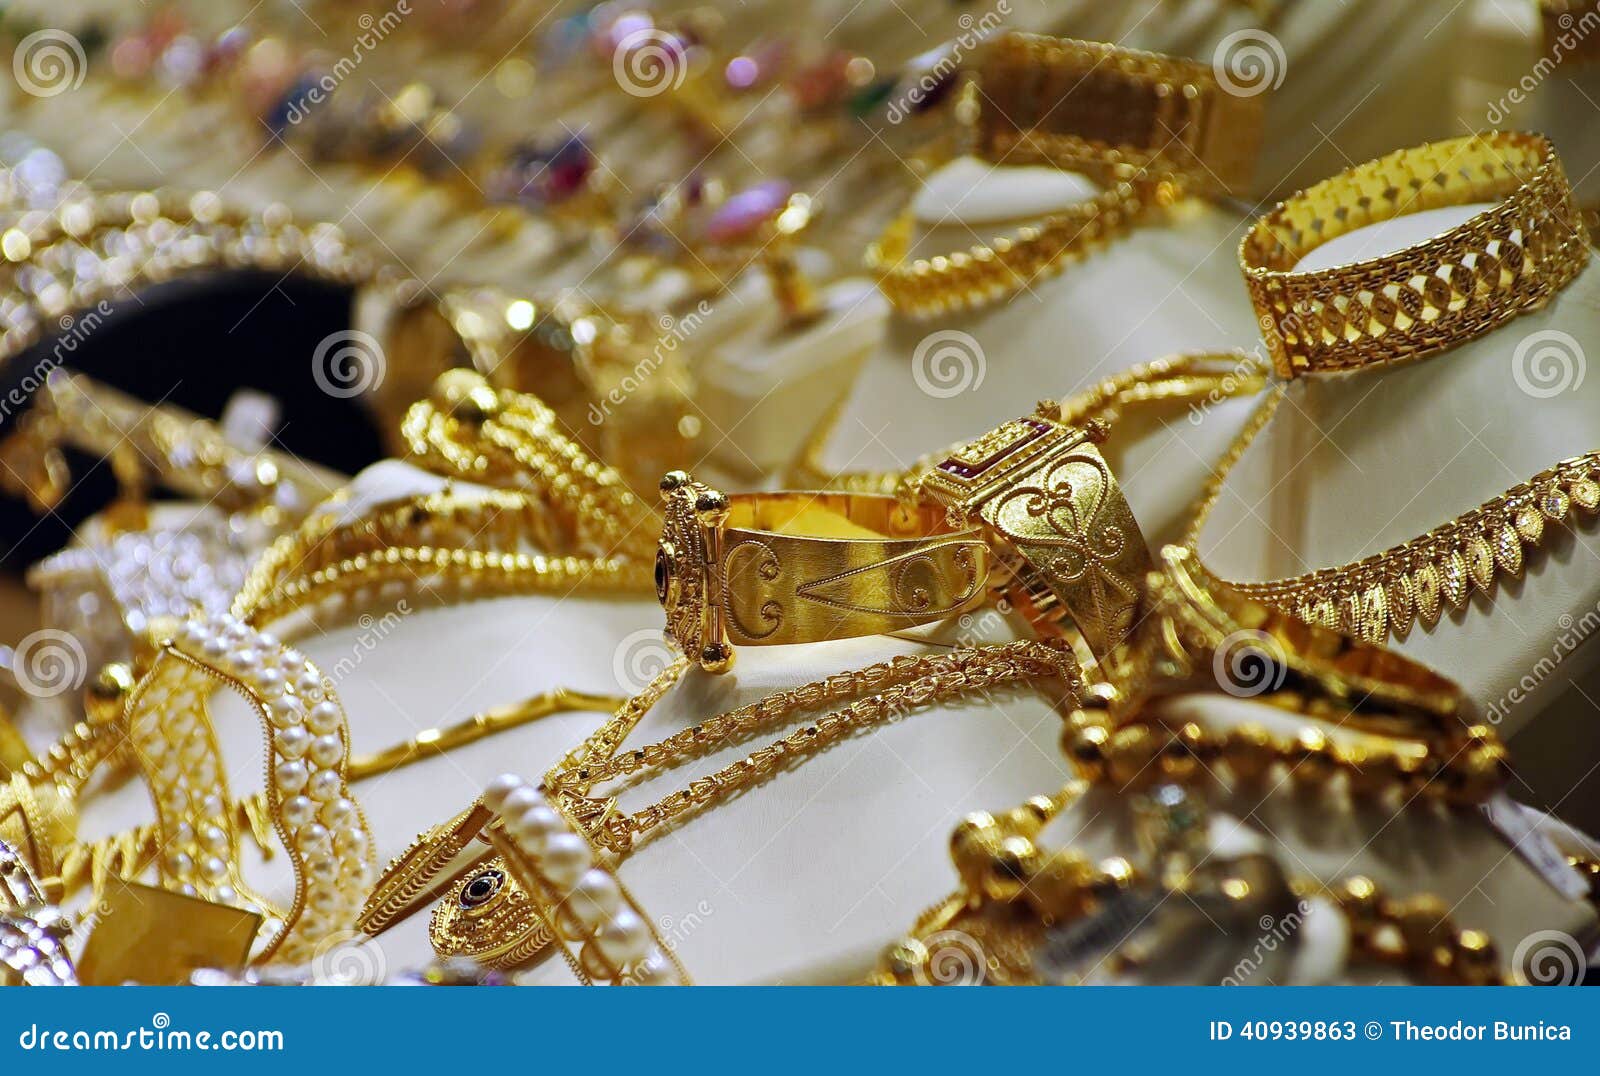 gold jewellery for sale in shop